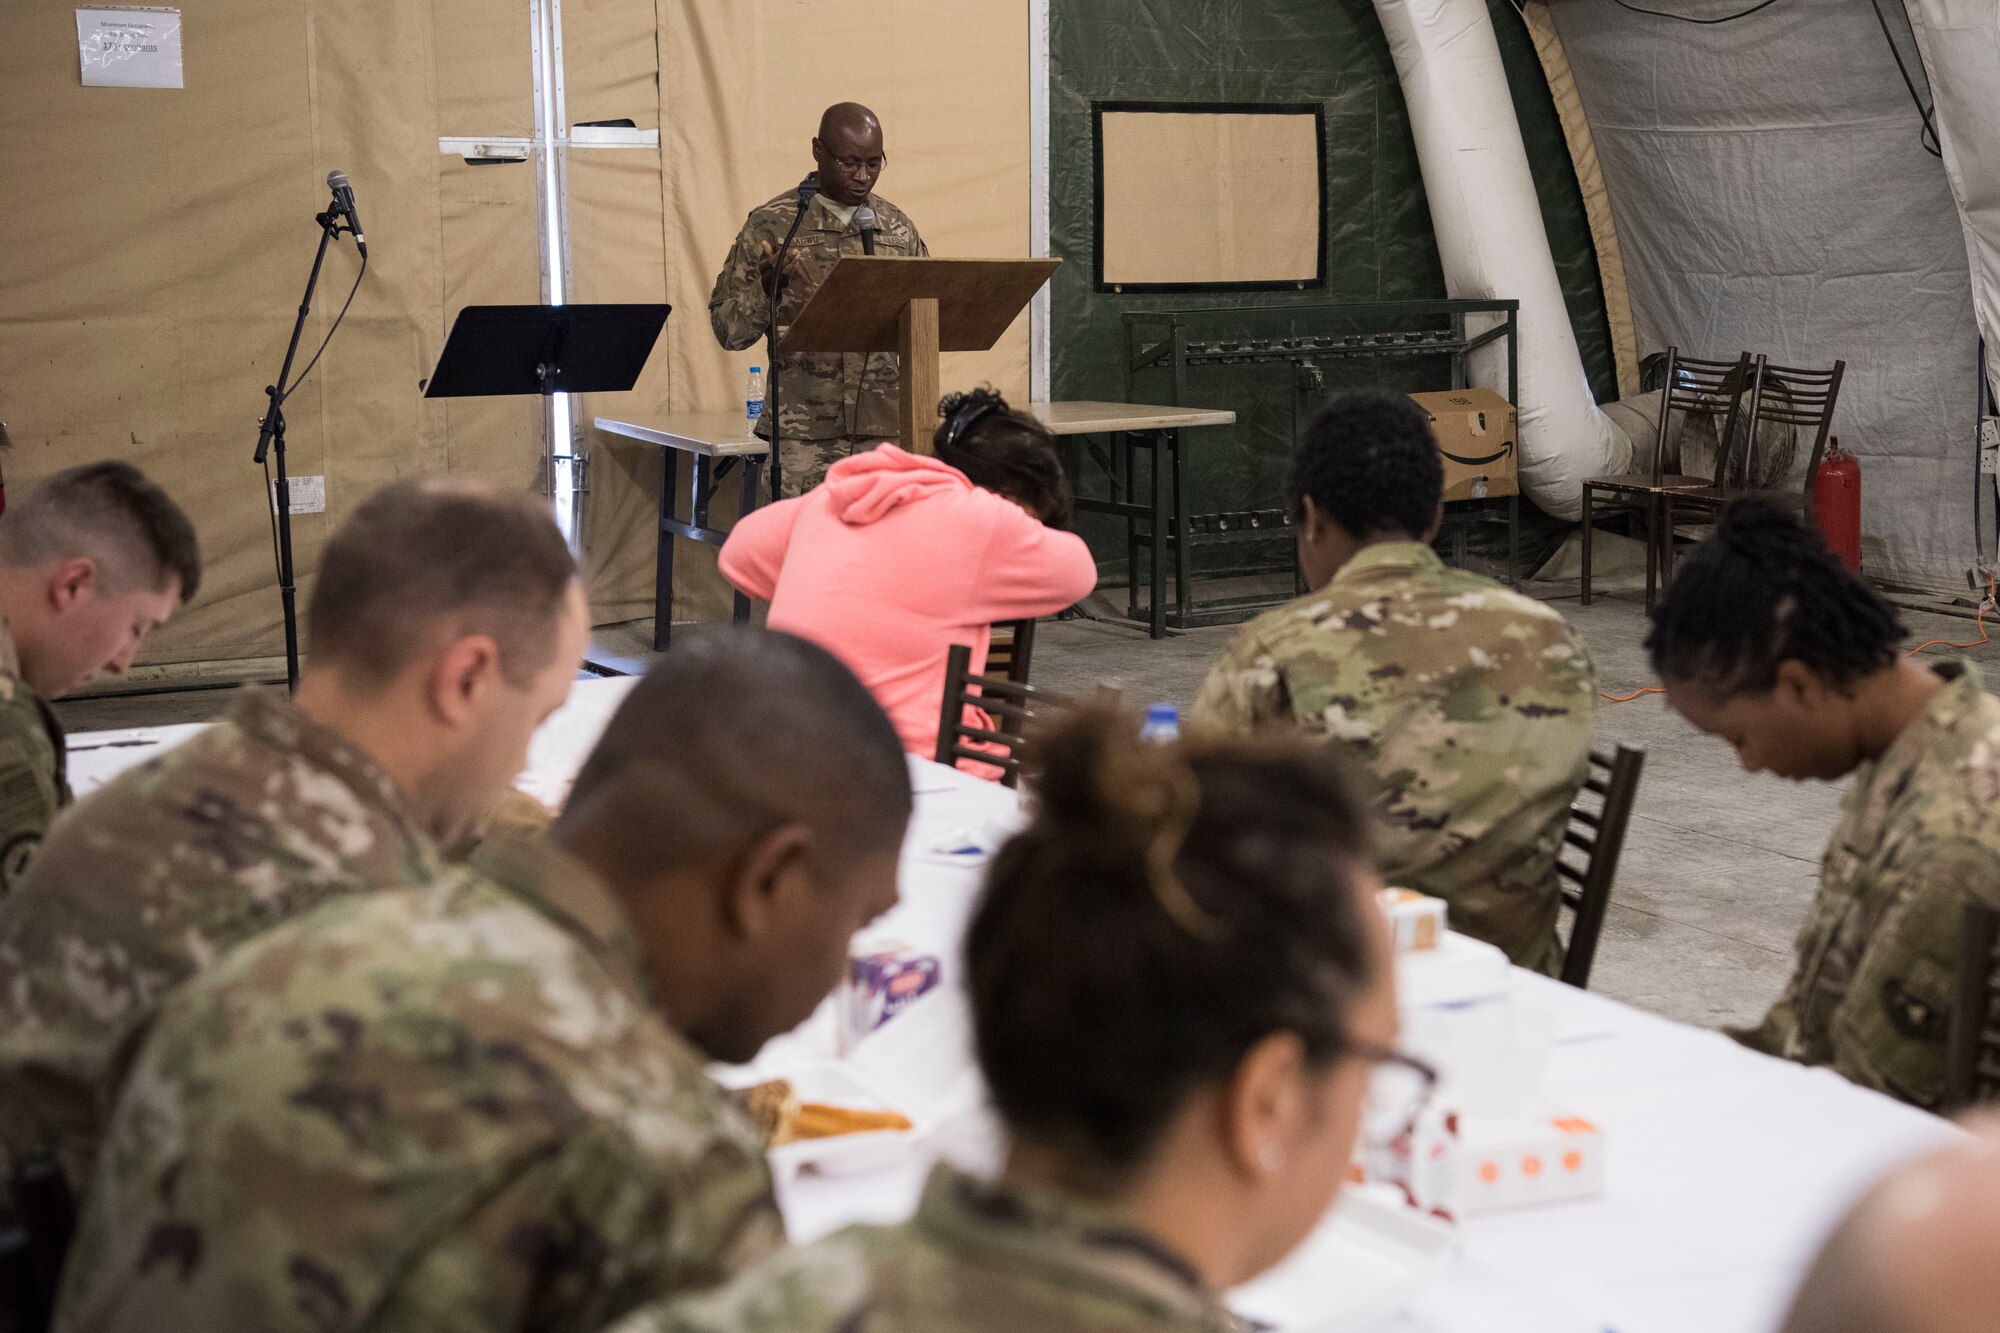 Capt. Brendan Mbagwu, 332nd Air Expeditionary Wing chaplain, recites a prayer during a breakfast the 332nd Air Expeditionary Wing held in observance of National Day of Prayer May 3, 2018, at an undisclosed location in Southwest Asia.